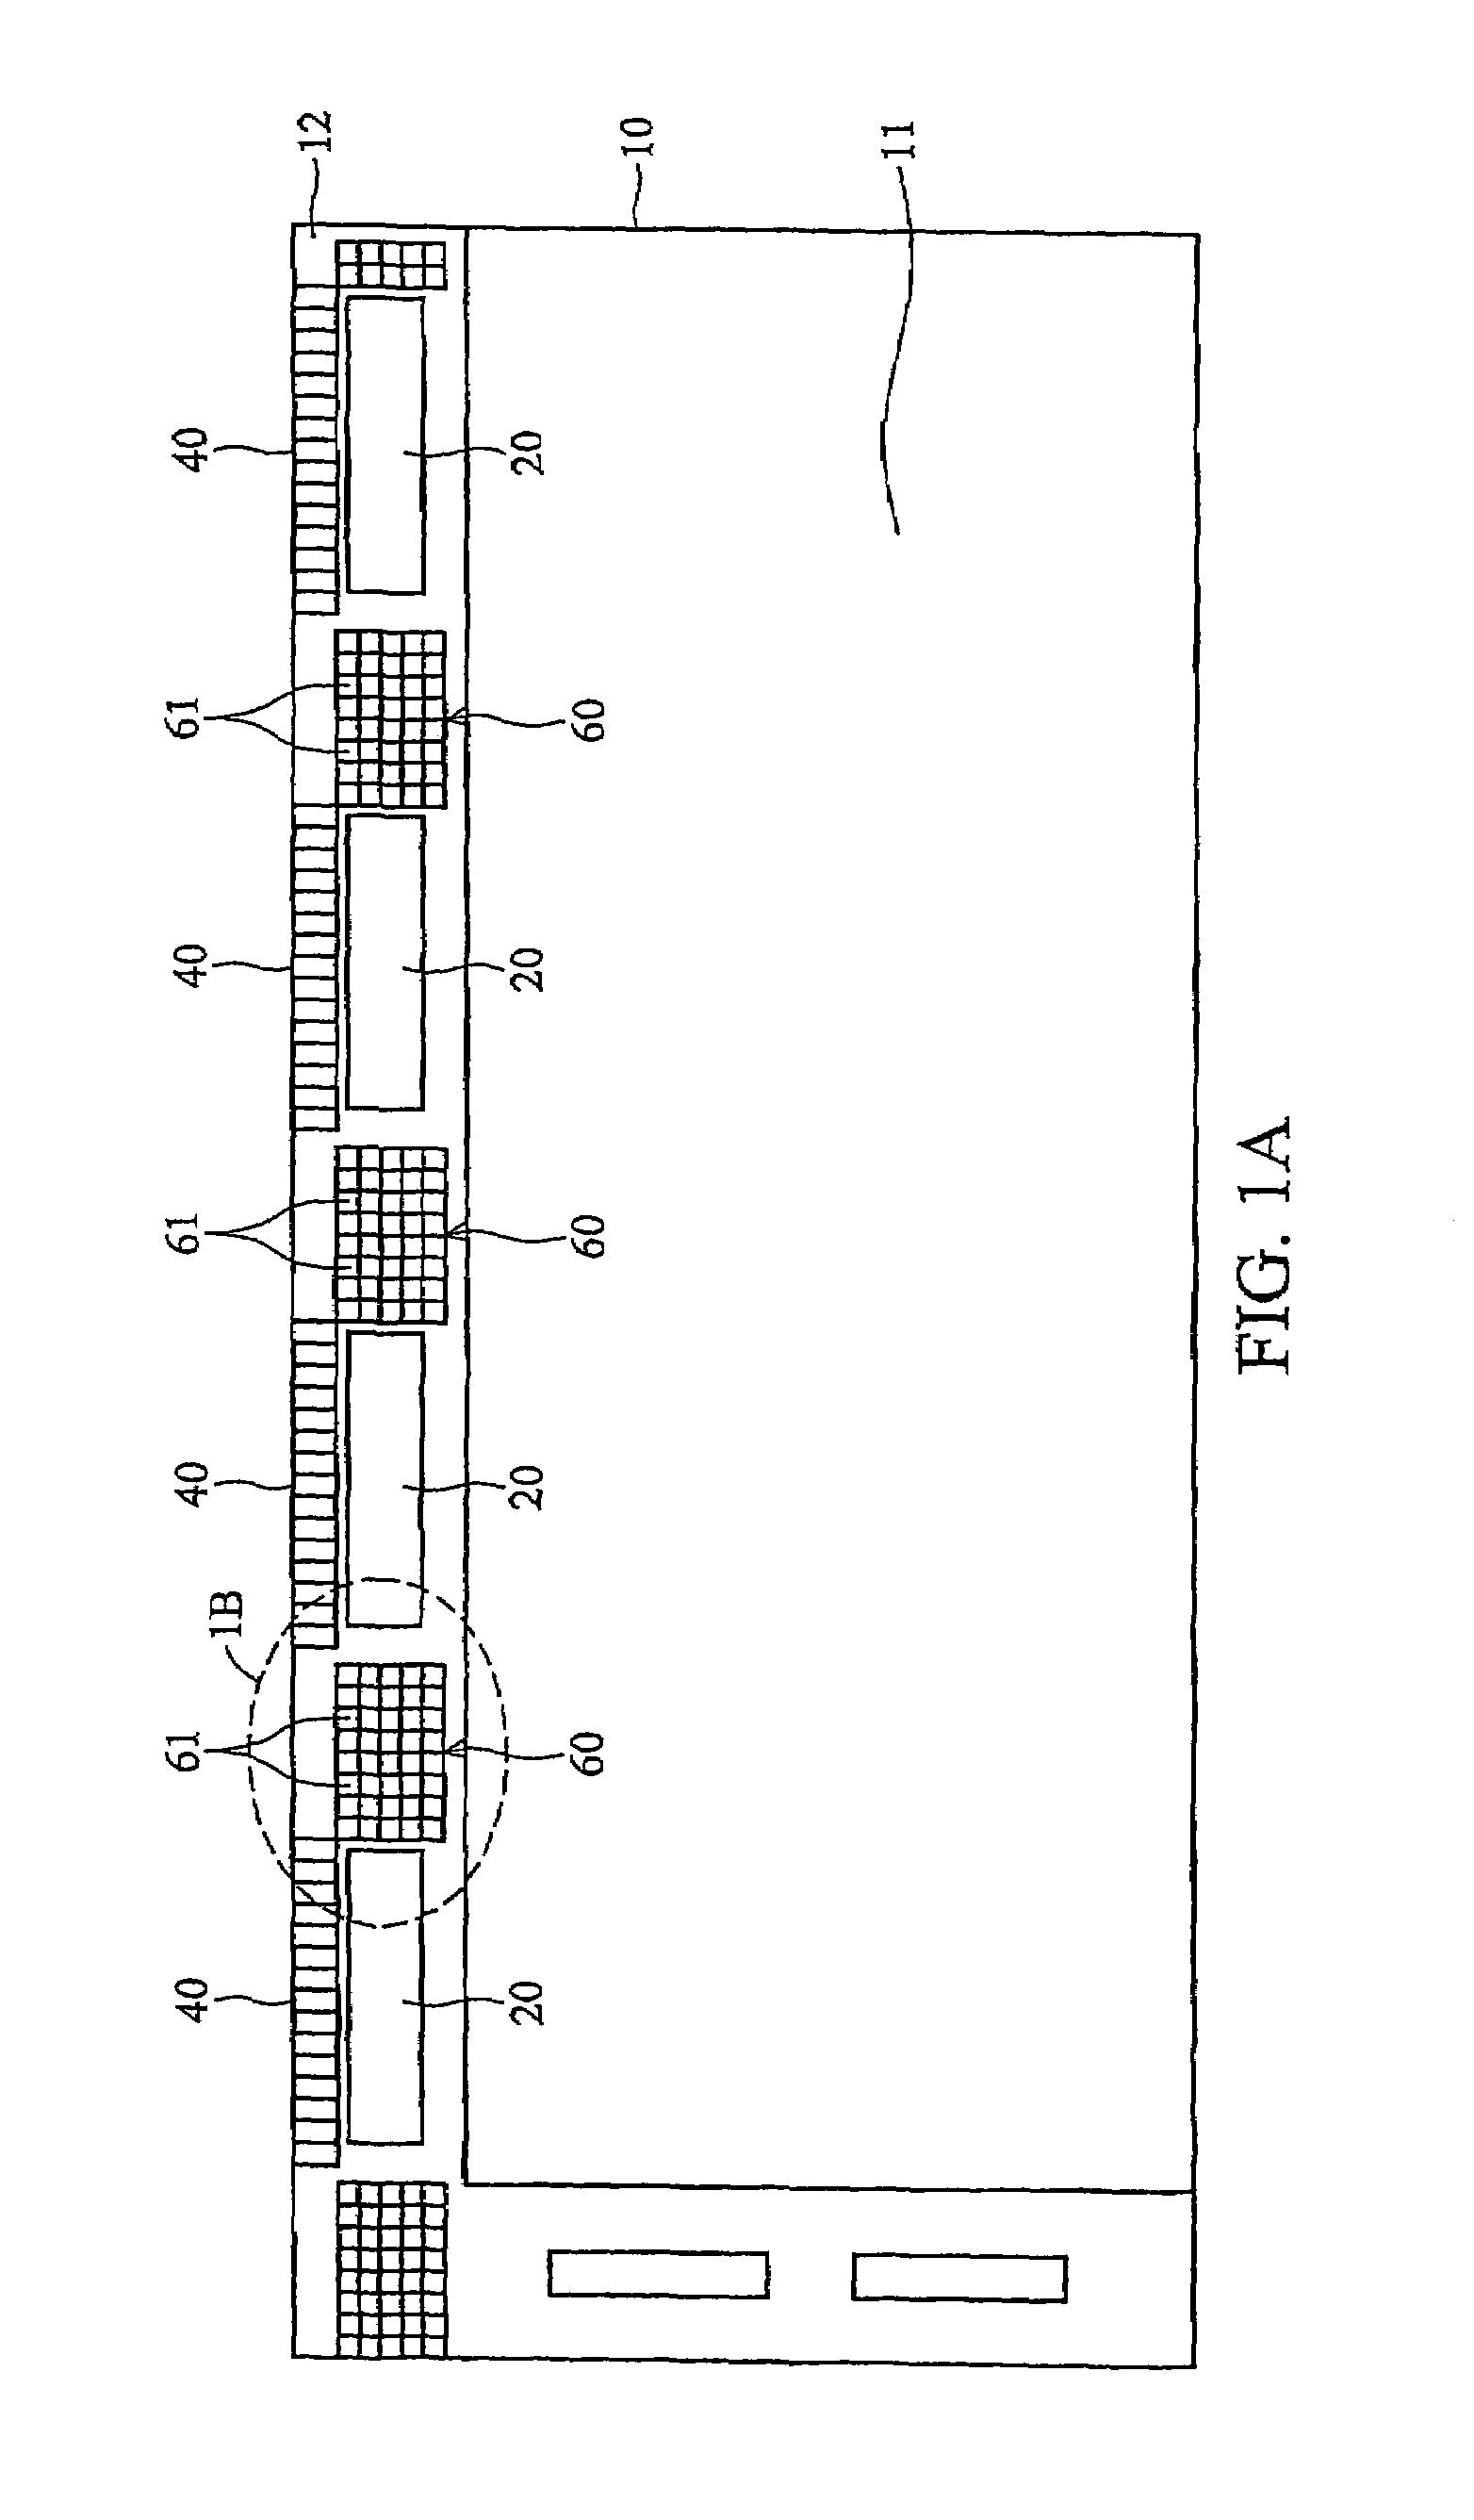 Test pad array for contact resistance measuring of ACF bonds on a liquid crystal display panel